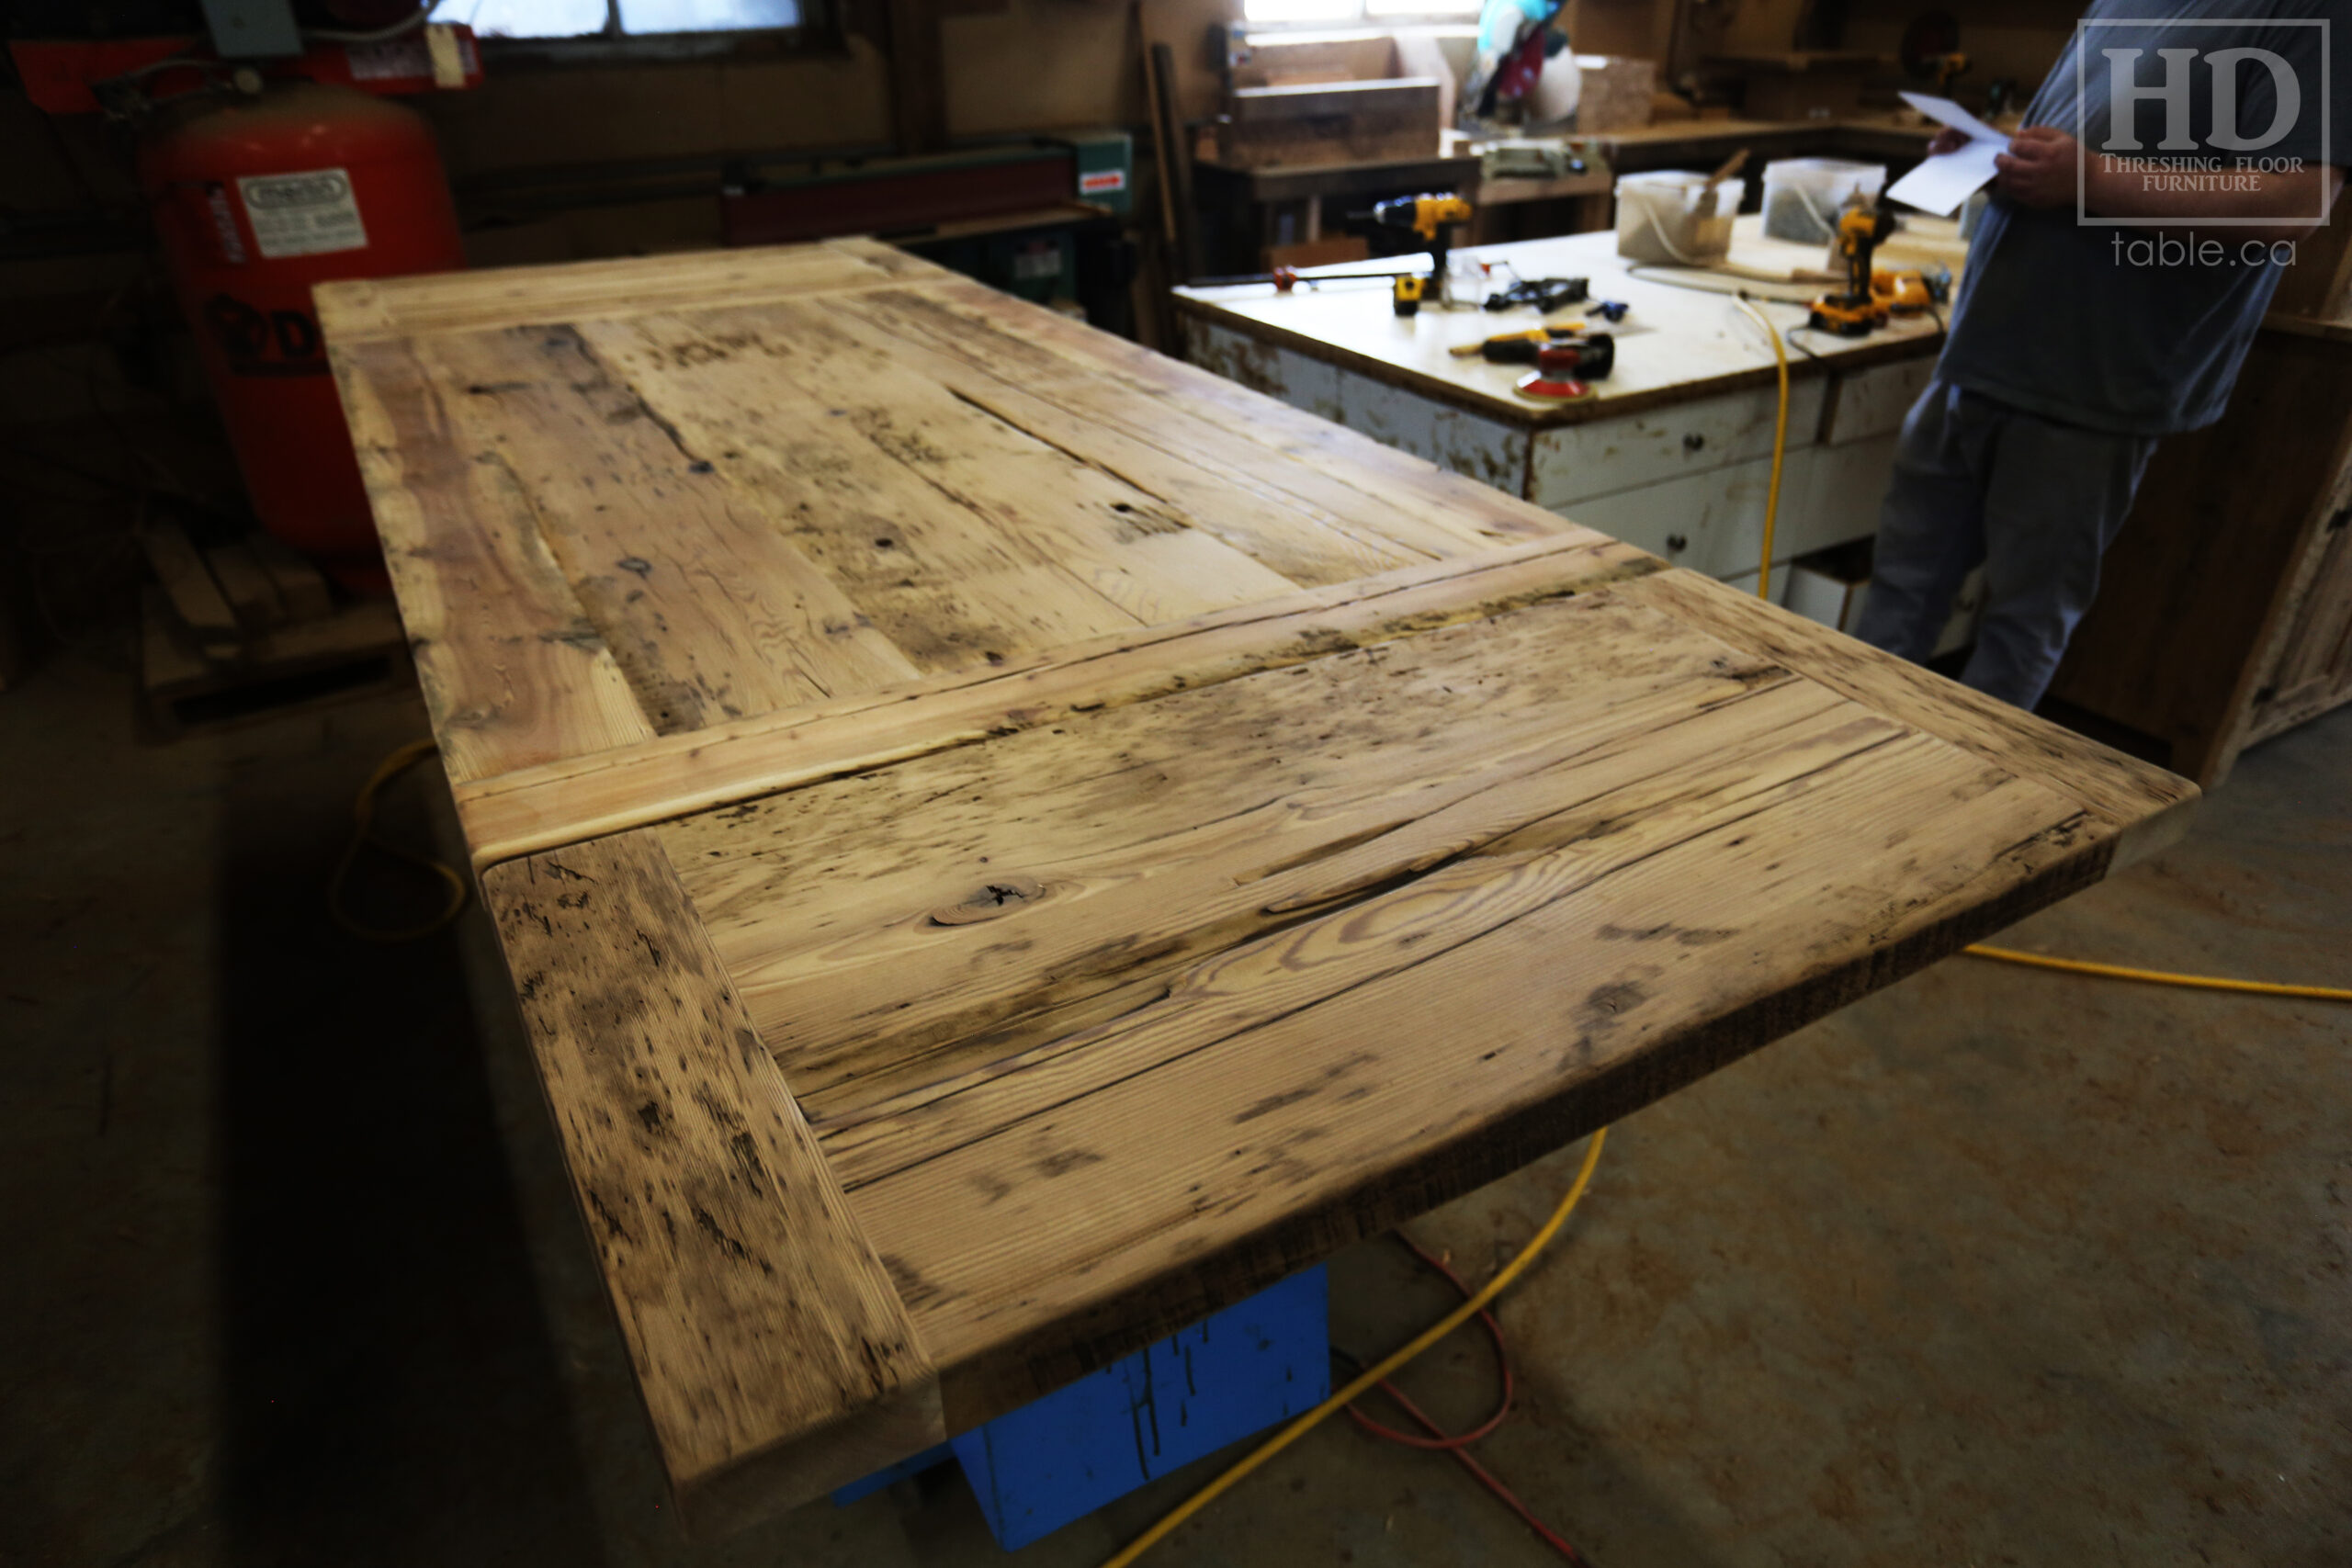 5 1/2' Reclaimed Ontario Barnwood Table we made for a Dundas, Ontario Home - 40" wide - U Shaped Matte Black Metal Base - Old Growth Hemlock Threshing Floor Construction - Original edges & distressing maintained - Premium epoxy + satin polyurethane finish - Two 18" Leaves - www.table.ca